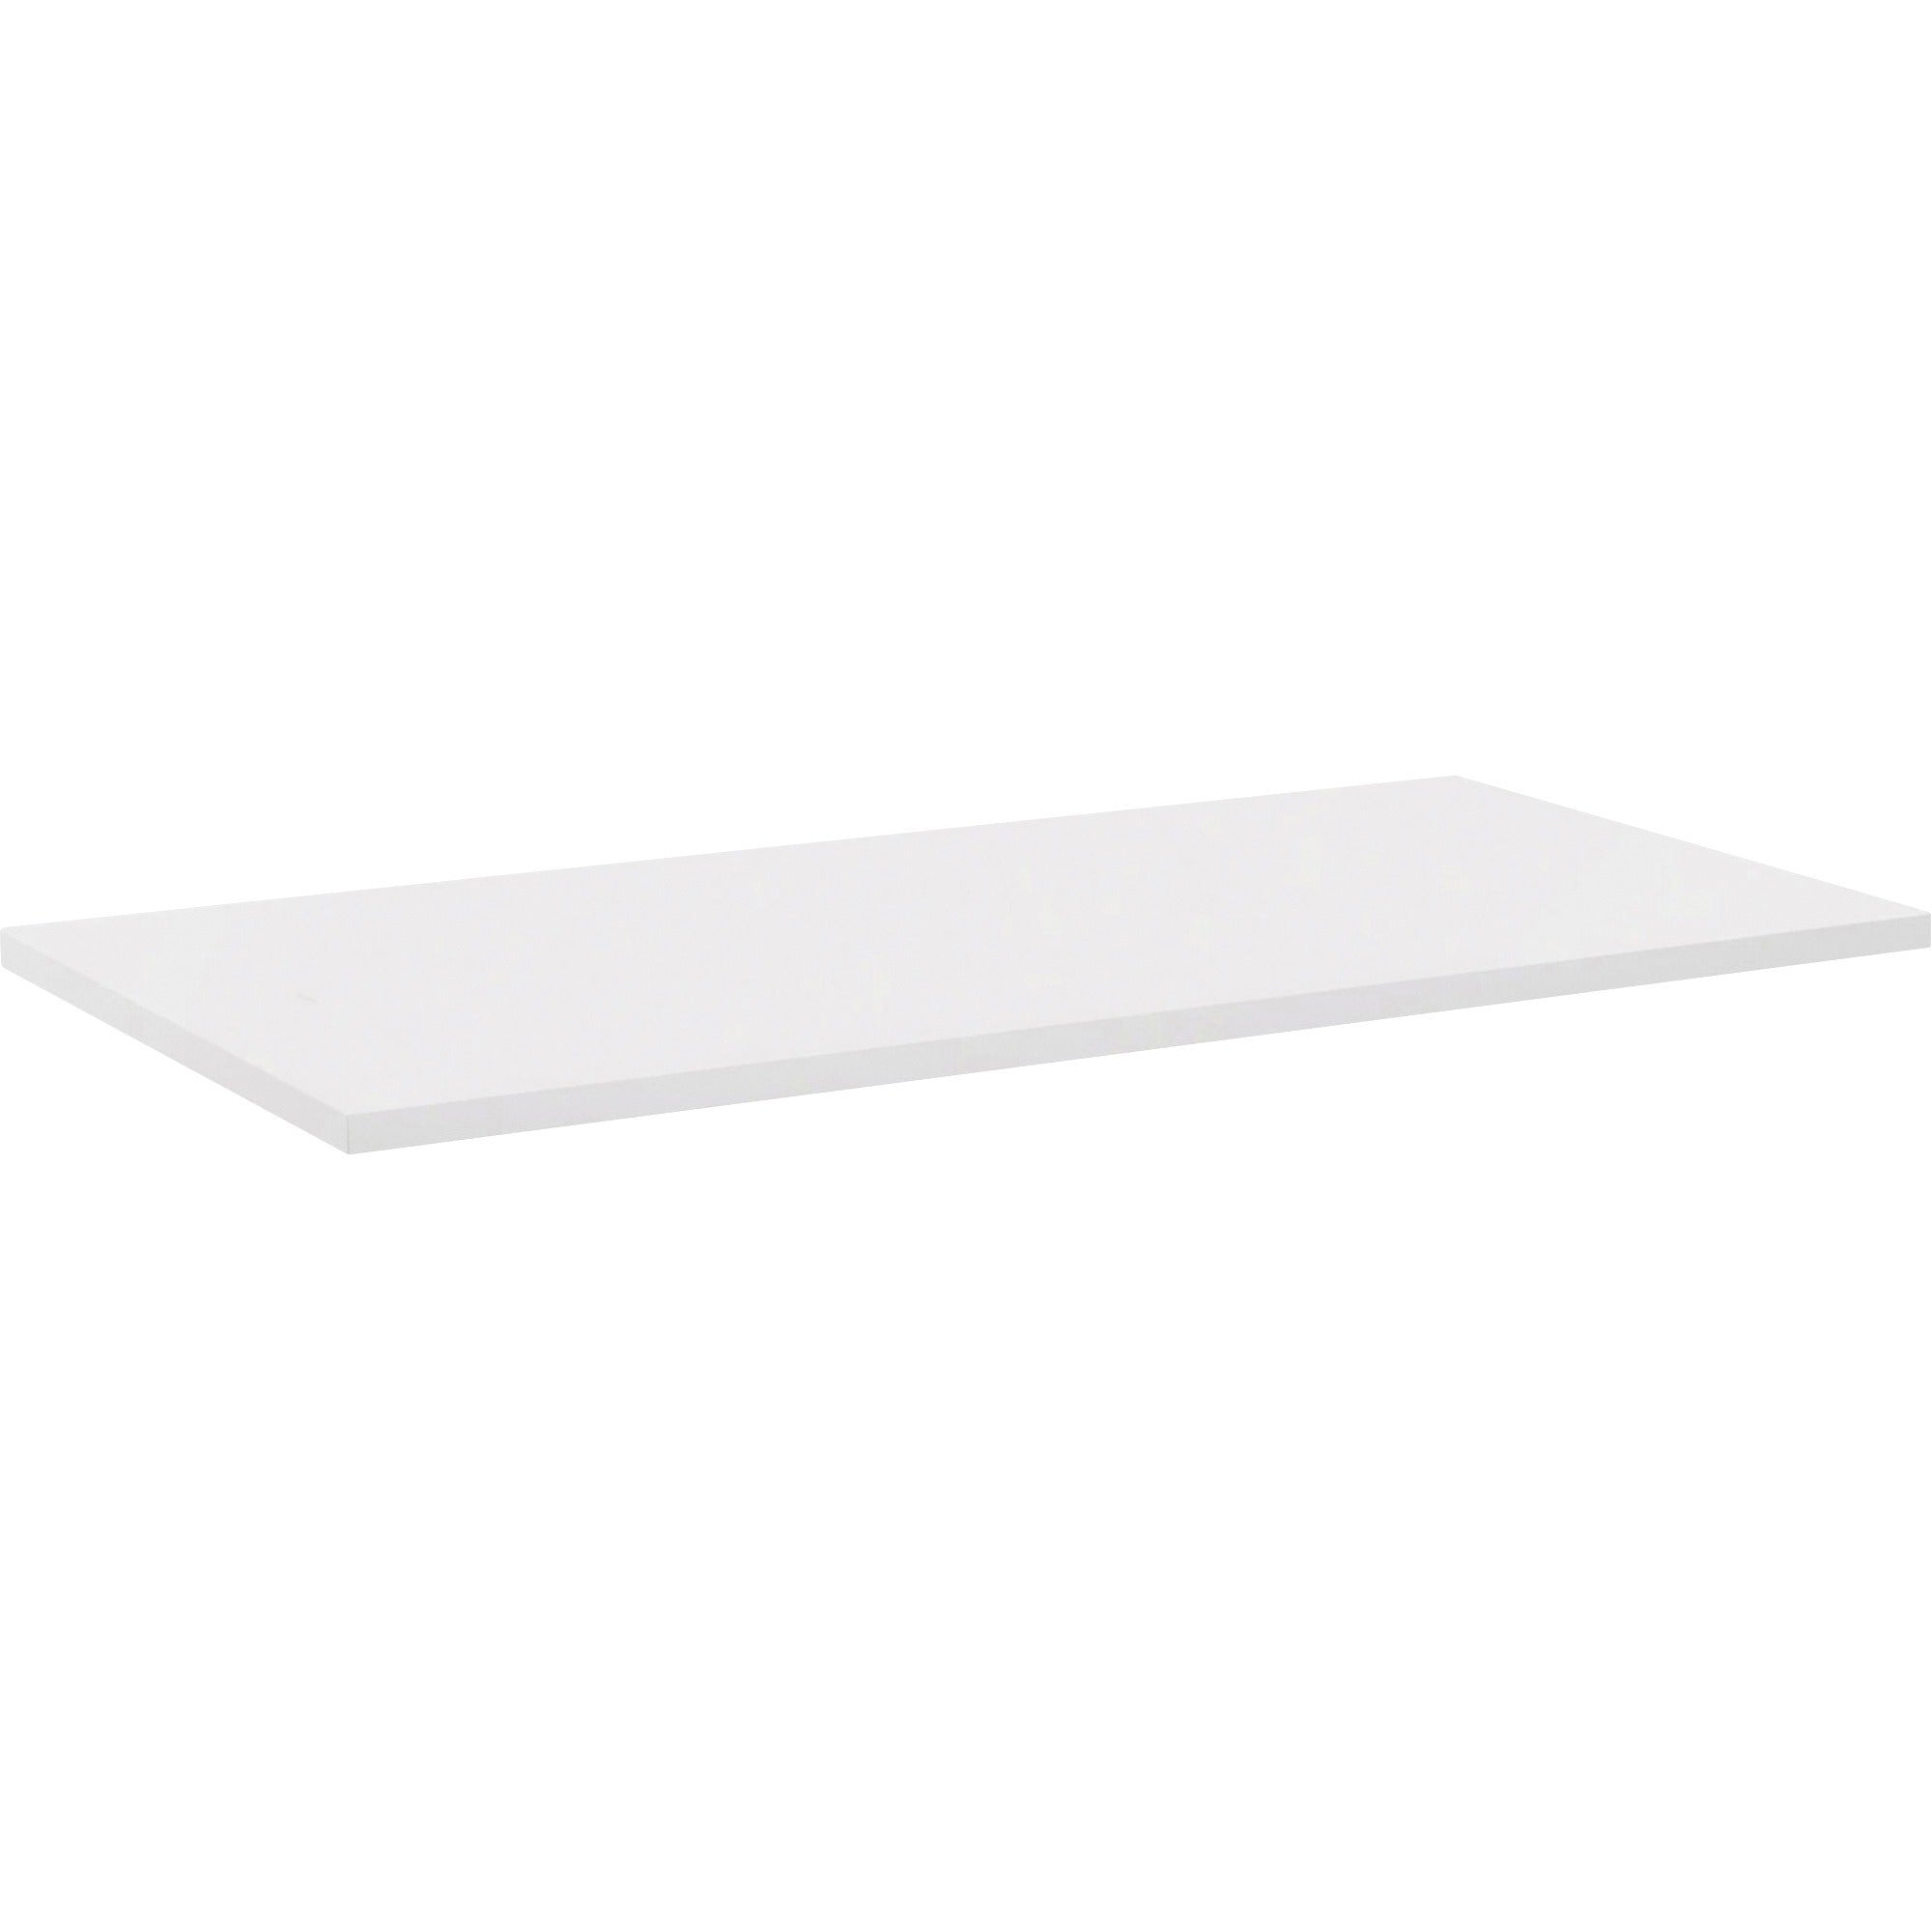 special-t-kingston-60w-table-laminate-tabletop-for-table-topwhite-rectangle-low-pressure-laminate-lpl-top-60-table-top-length-x-24-table-top-width-x-1-table-top-thickness-1-each_sctsp2460wht - 1